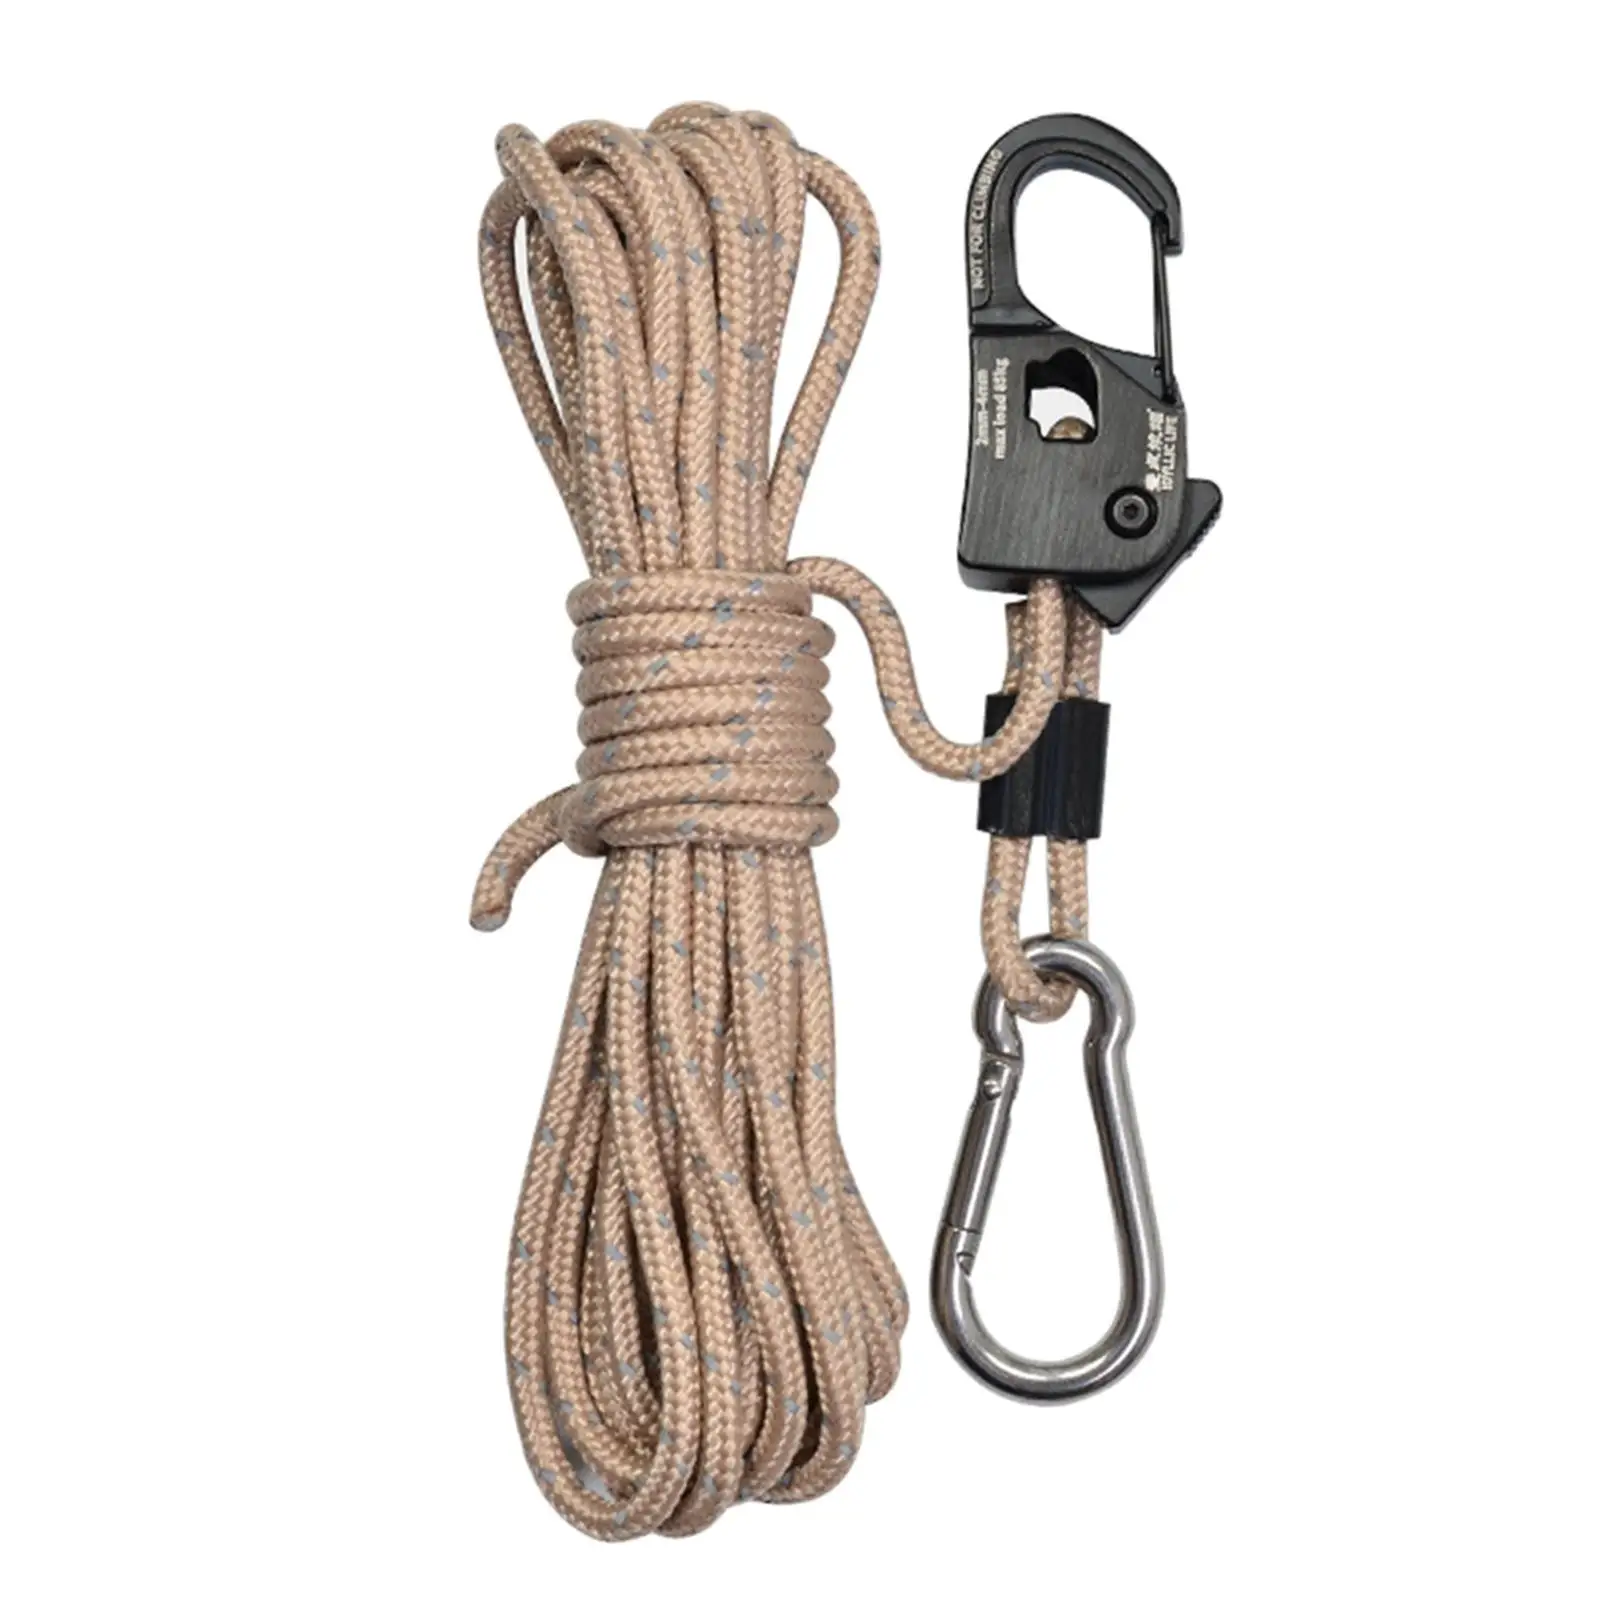 4mm Tent Guy Rope with Pulley Tent Guide Rope Fast Locking Nylon Lanyard Aluminum Alloy Self Locking Regulator for Hiking